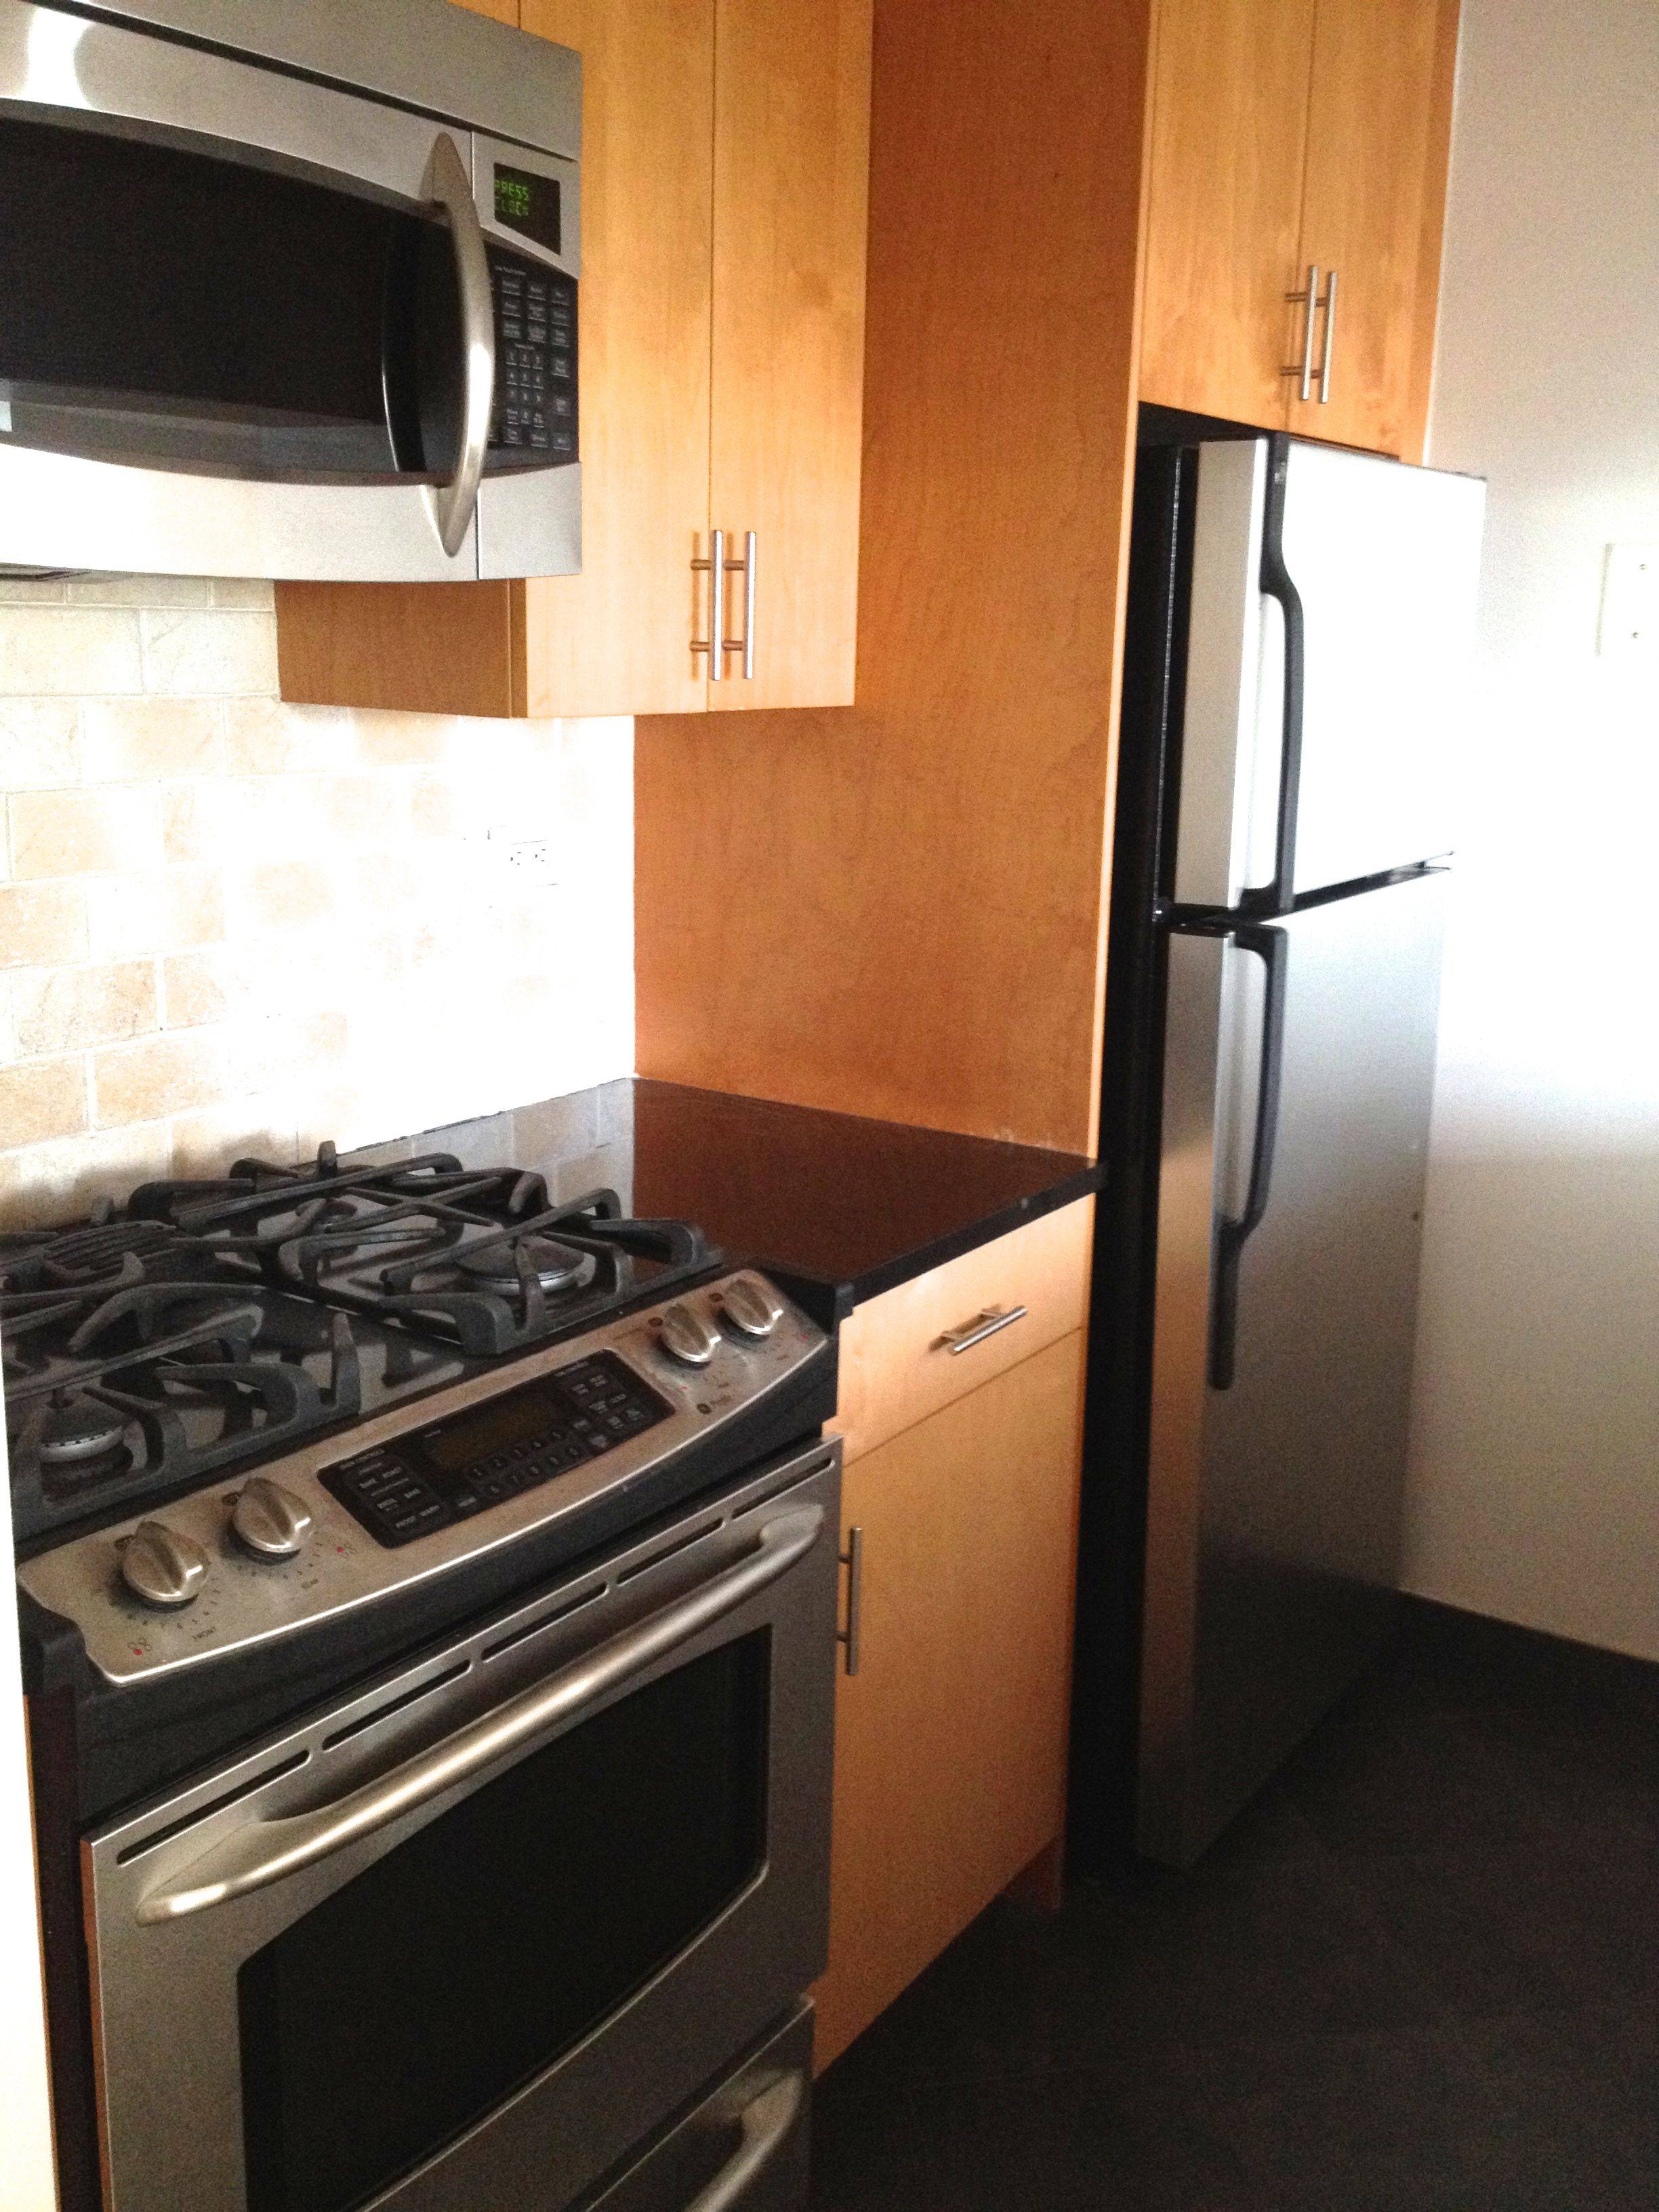 Upper East Side * 72nd Street *  High Floor. Washer/ Dryer in unit * Spacious Layout. Tons of Closets . Doorman Building with  free gym and Rooftop. Close to Subway. 